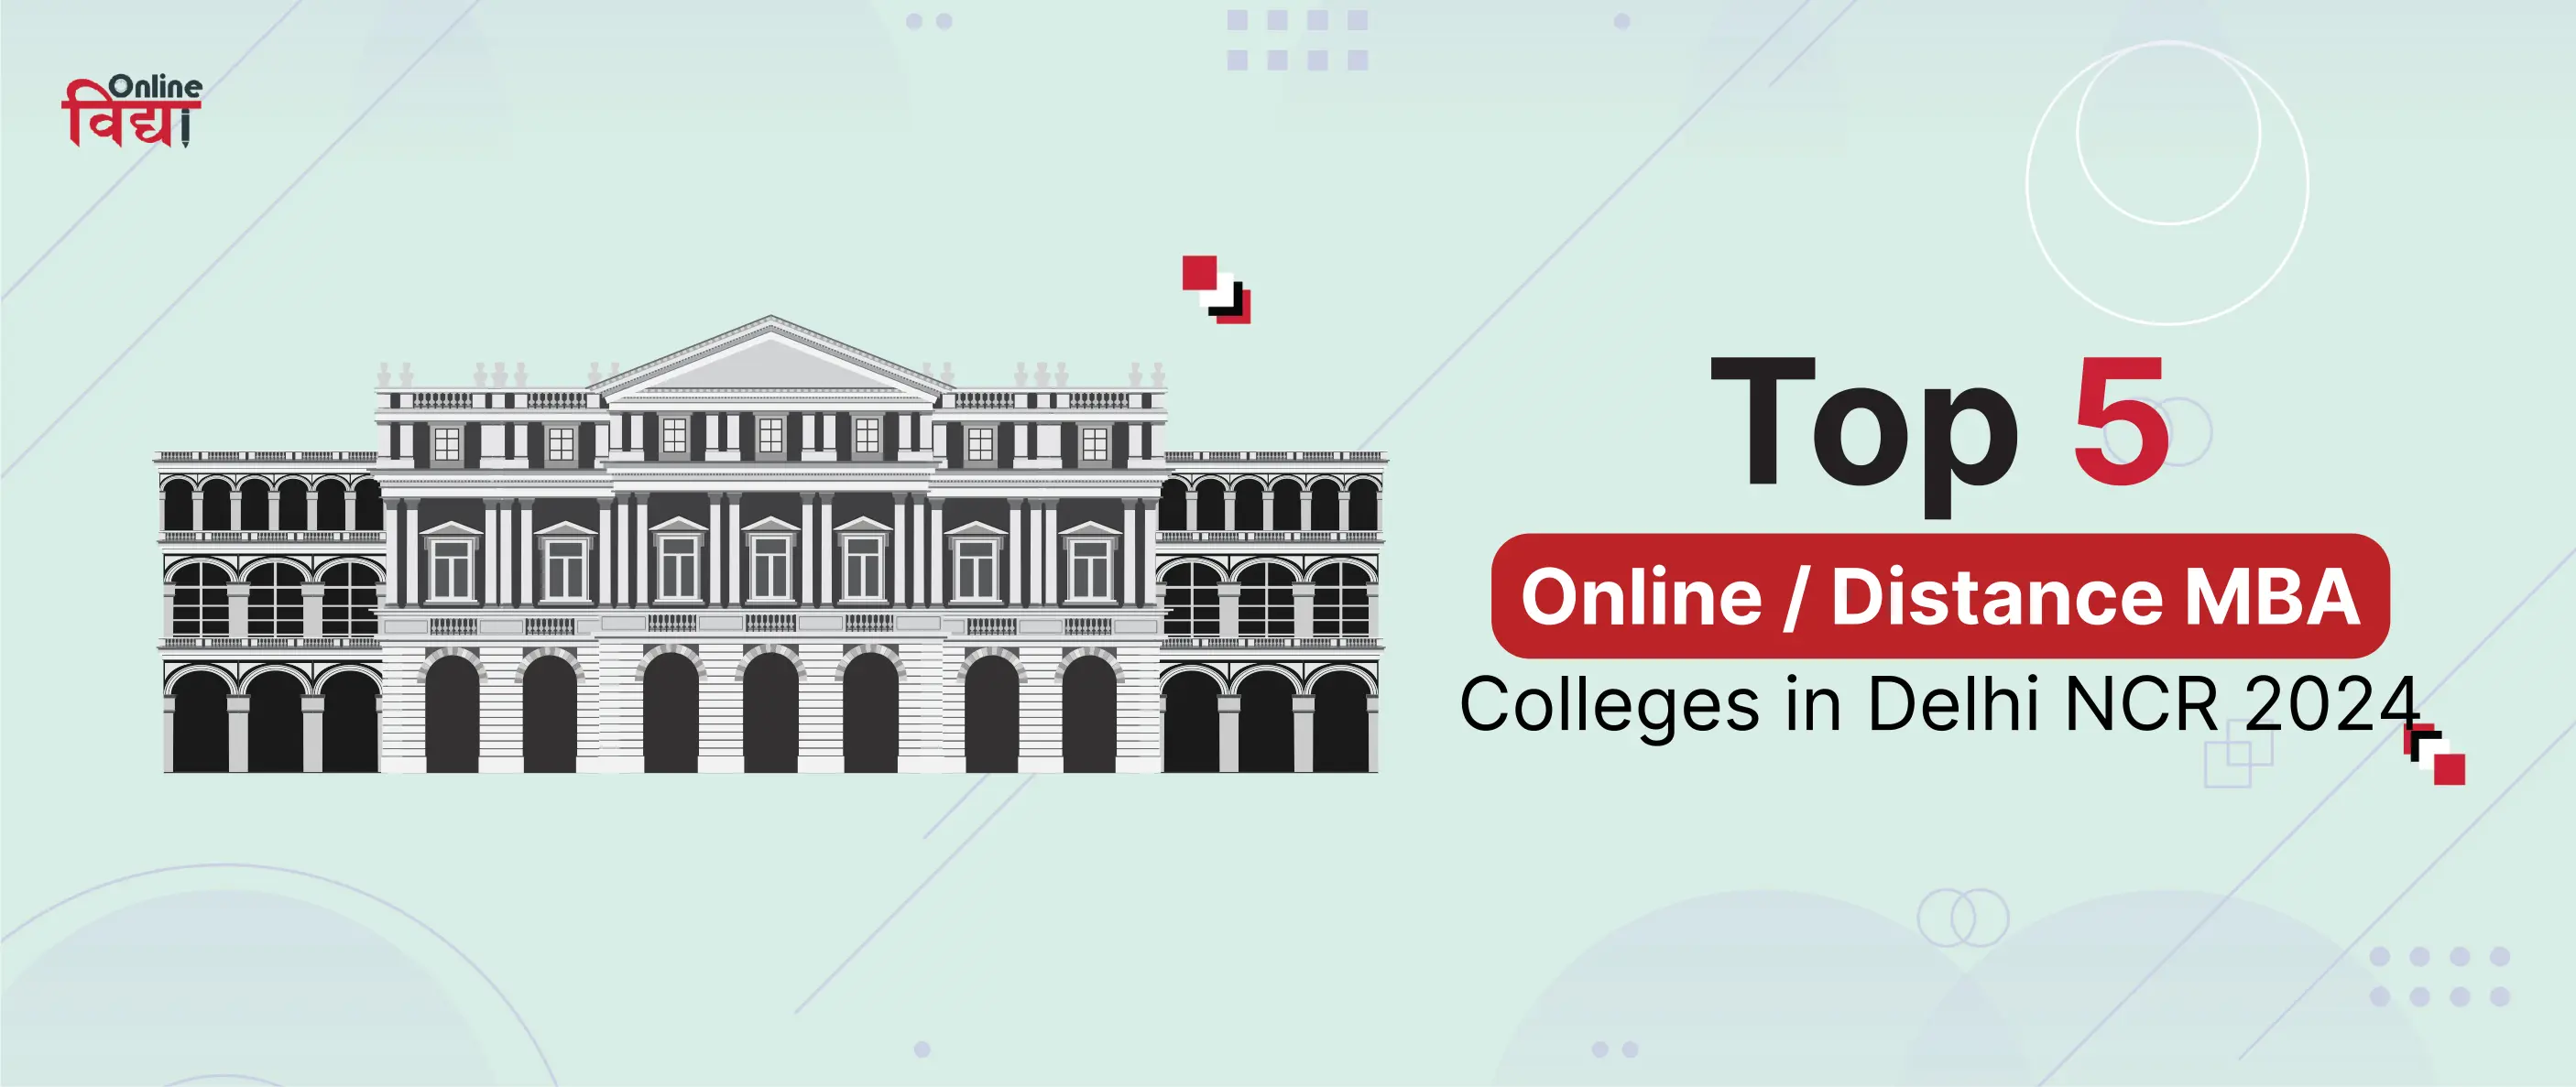 Top 5 Online/Distance MBA Colleges in Delhi NCR 2024